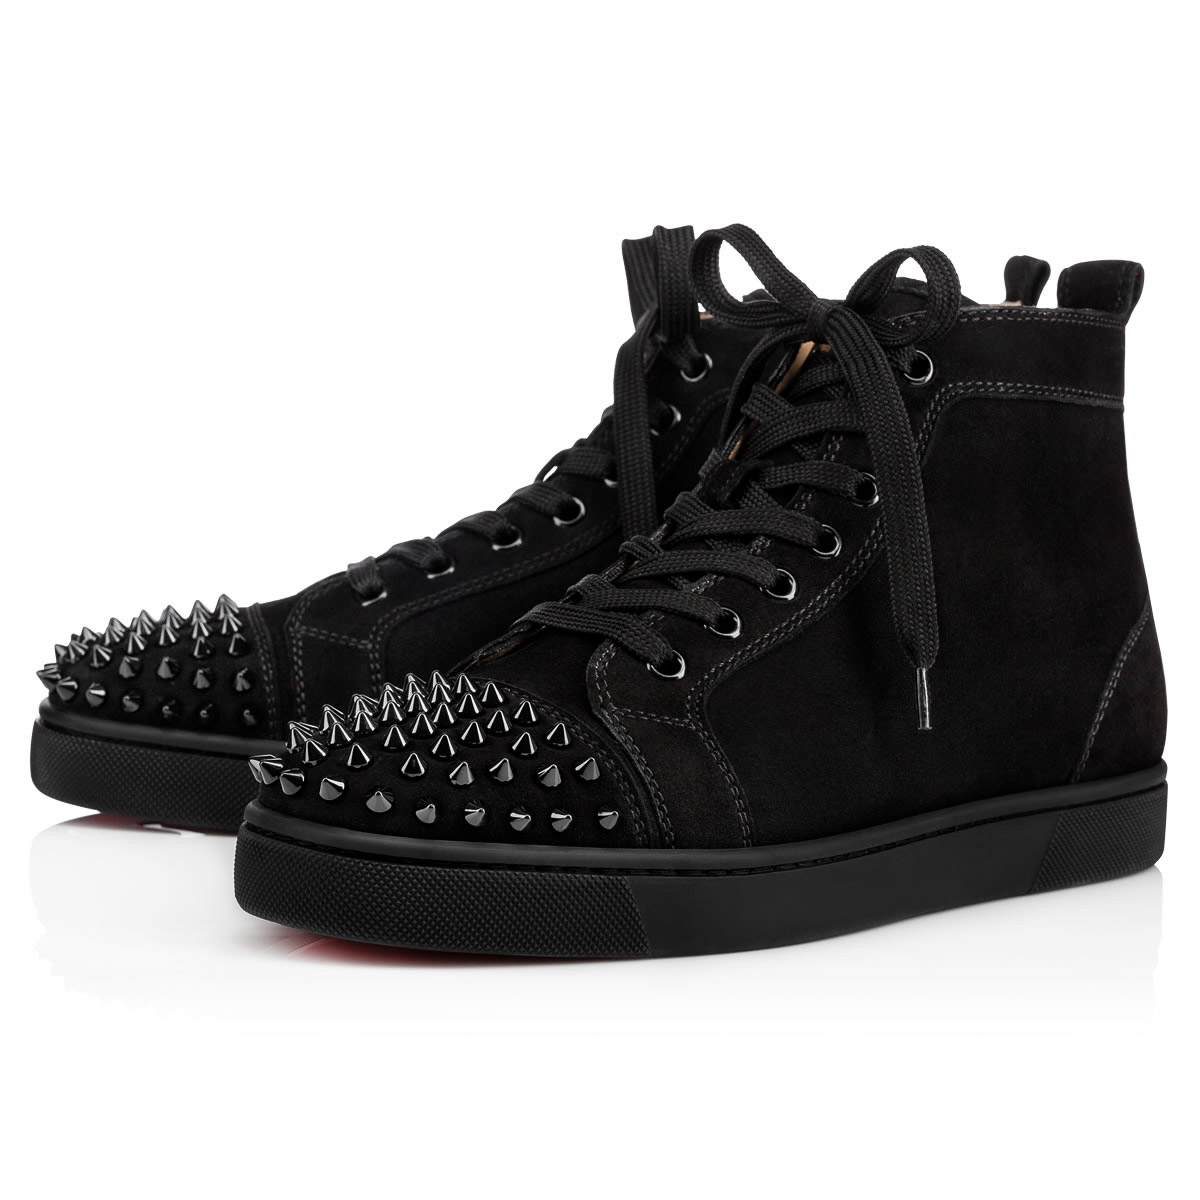 Christian Louboutin Louis Spikes Black Leather Sneakers New